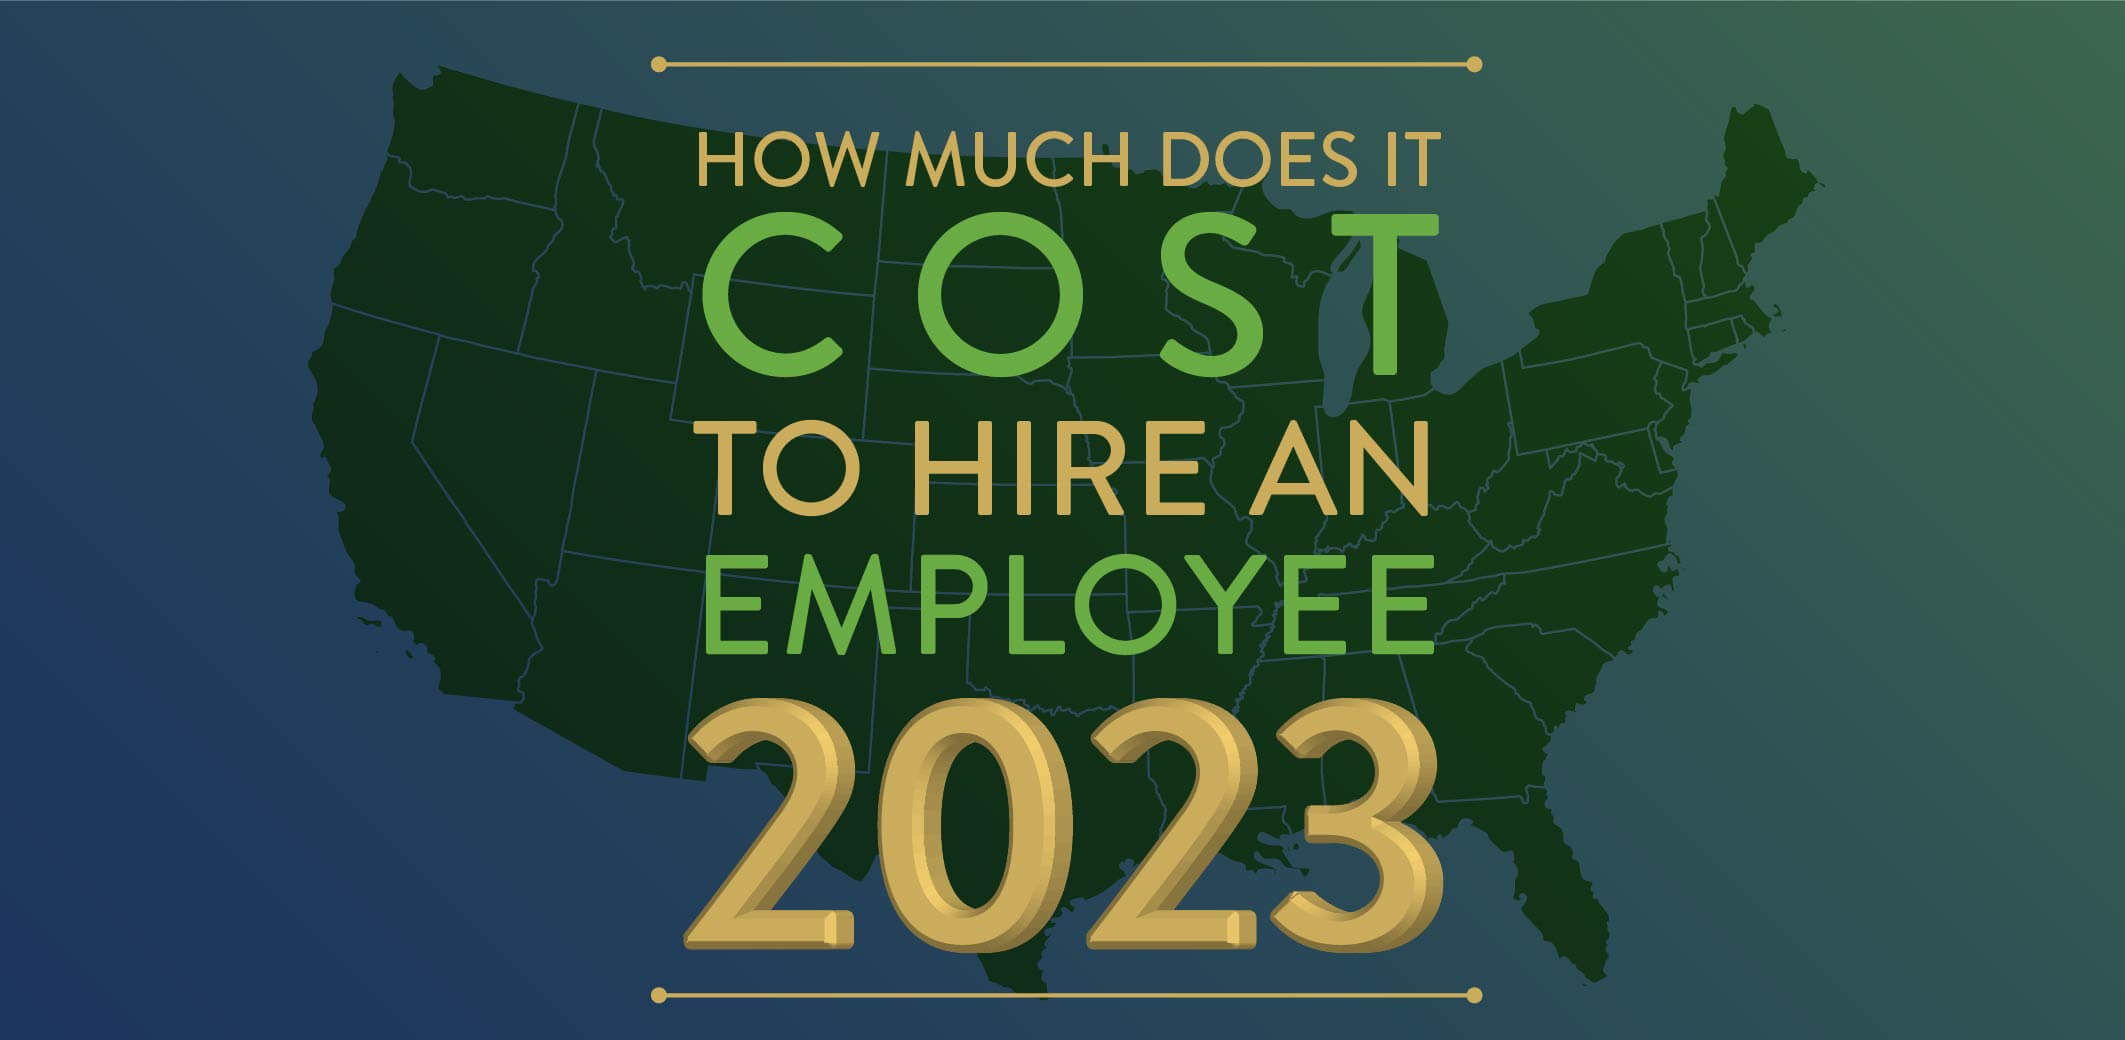 How Much Does it Cost to Hire an Employee in 2023?